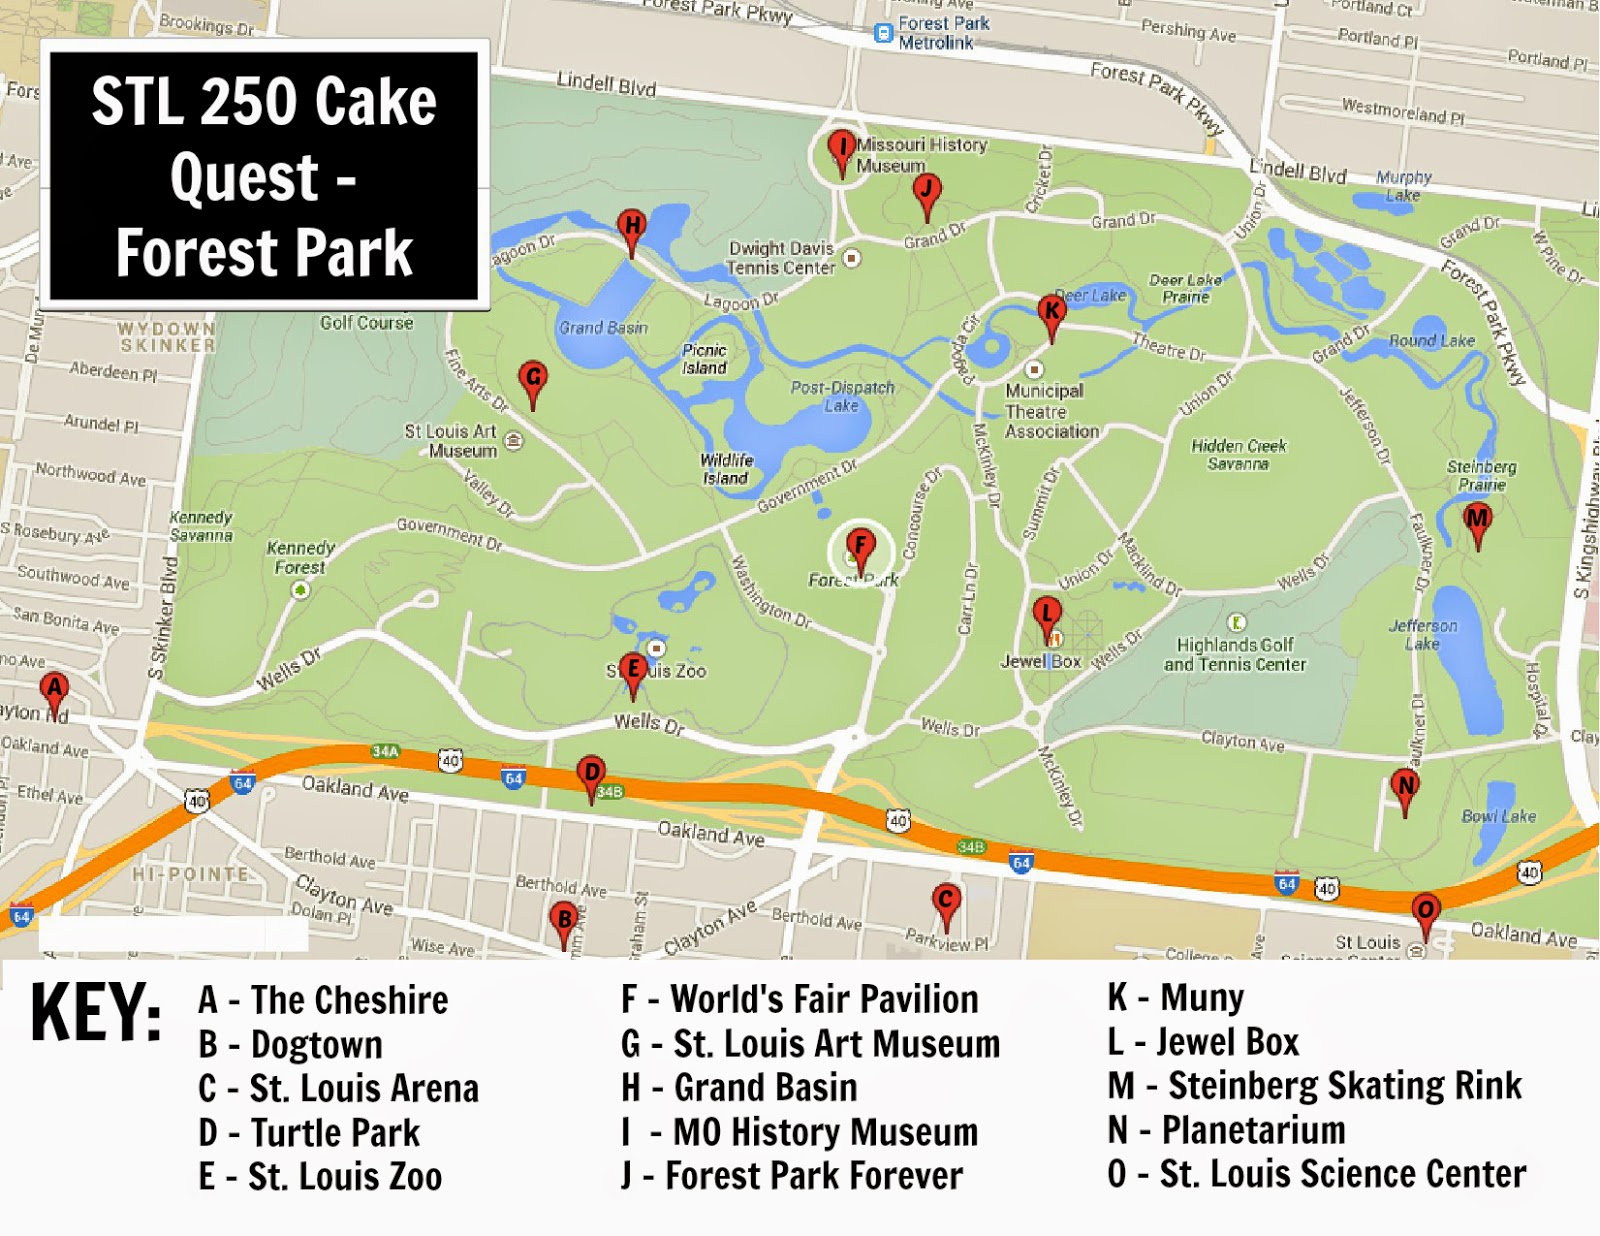 Keeping up with the Kiddos: STL 250 Cake Quest - Forest Park (Part 2)